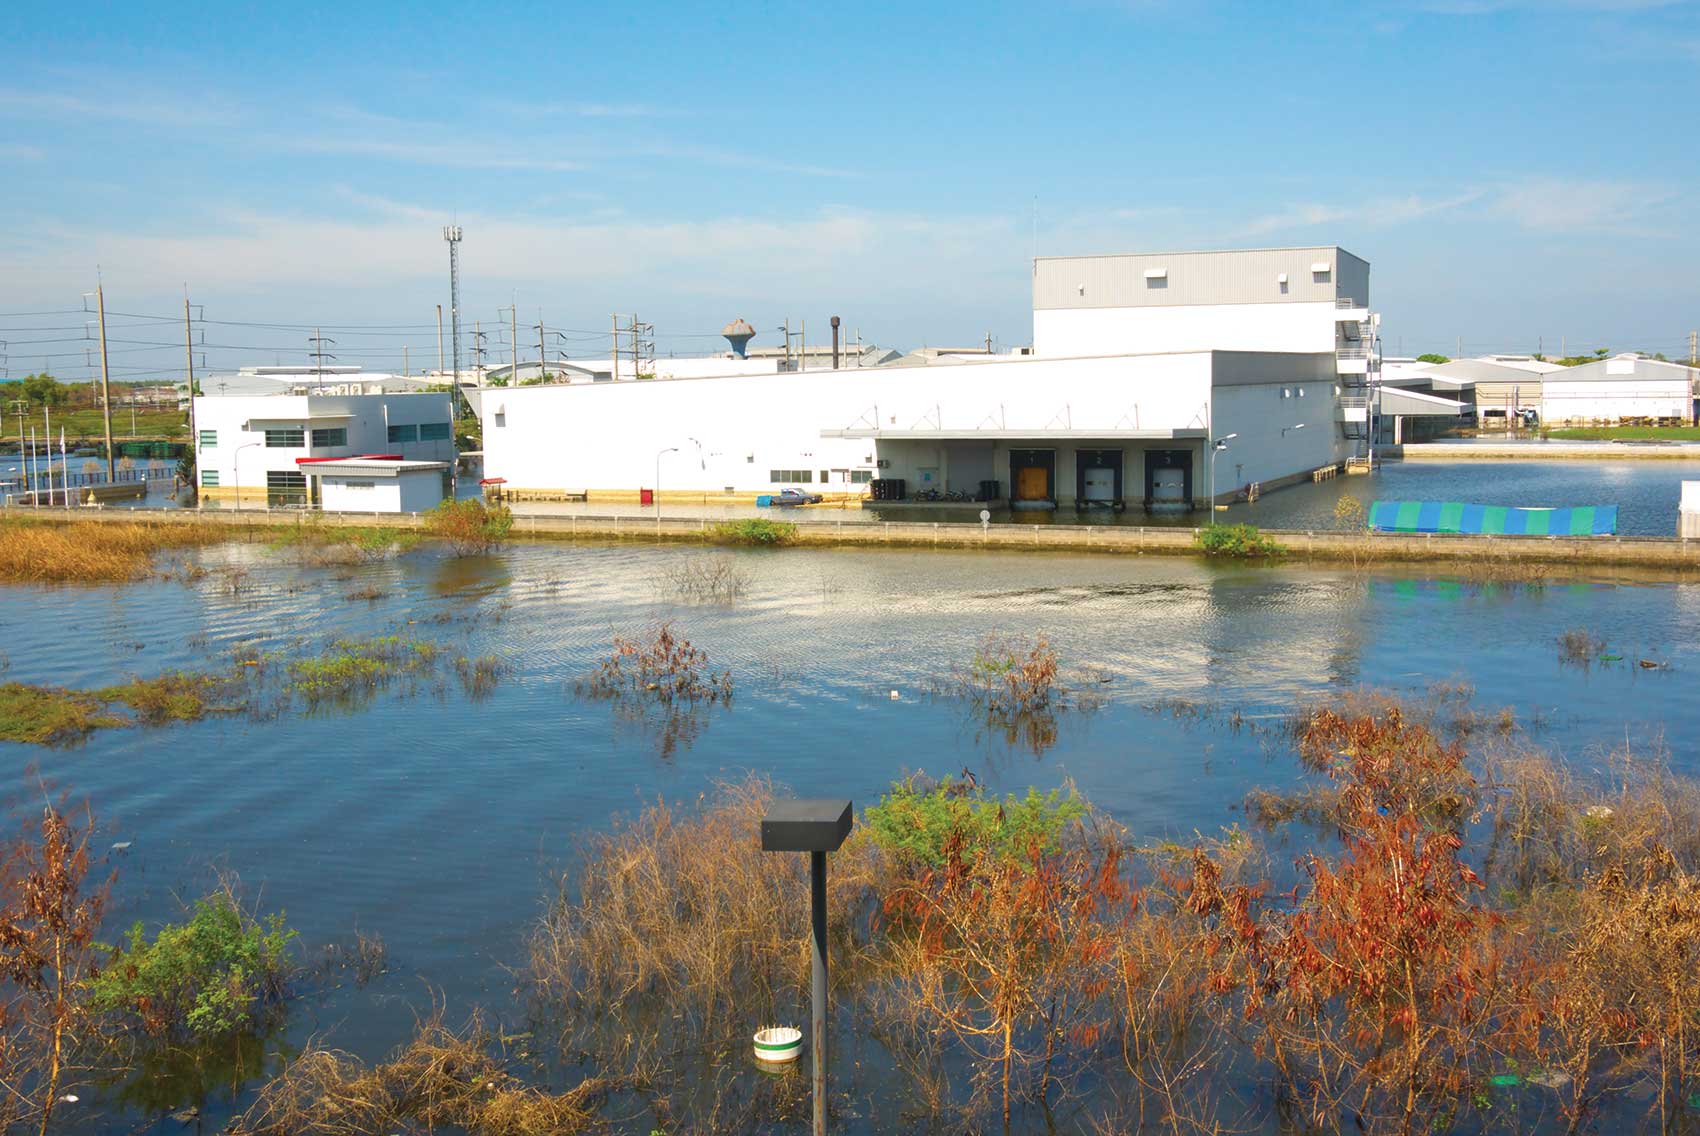 Industrial Plant after Flooding. Study NFPA 70B for recovery options